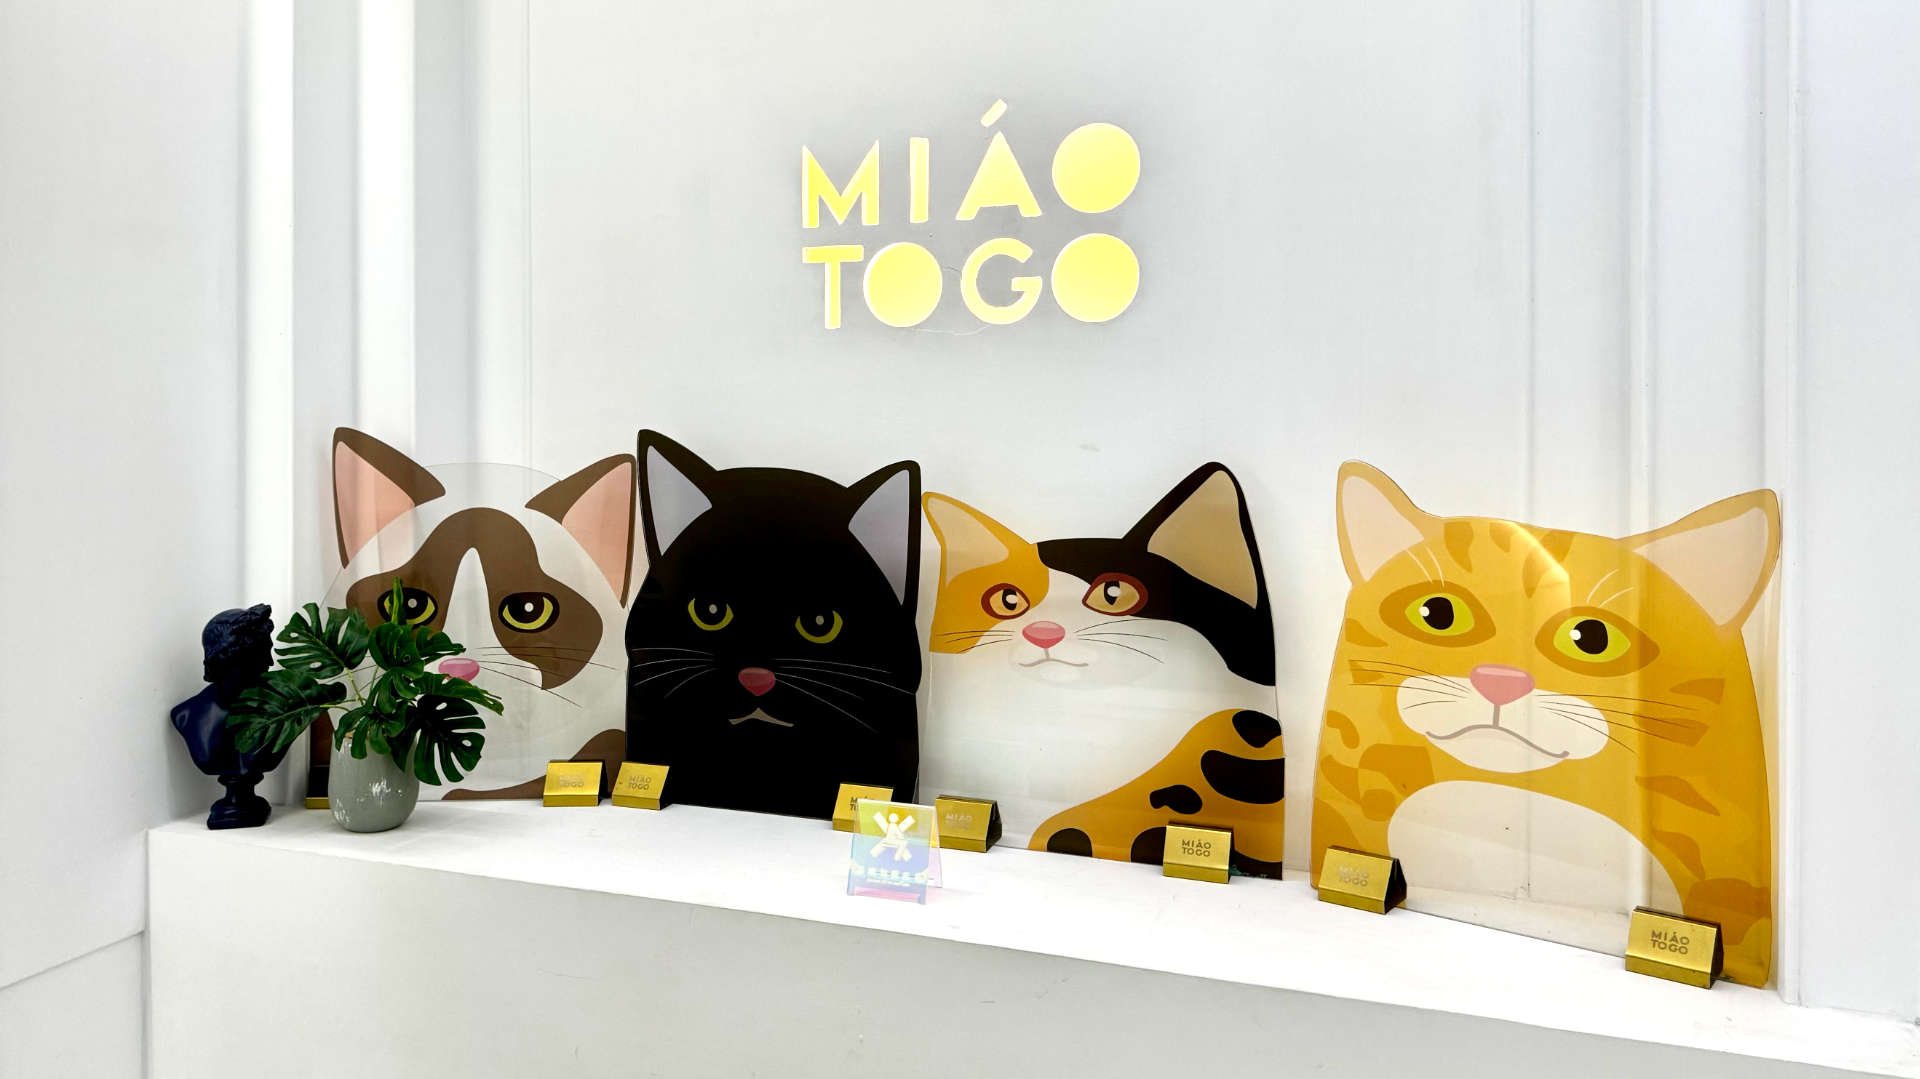 Four perspex cartoon-like cats resting on a shelf, under the Miao To Go logo.